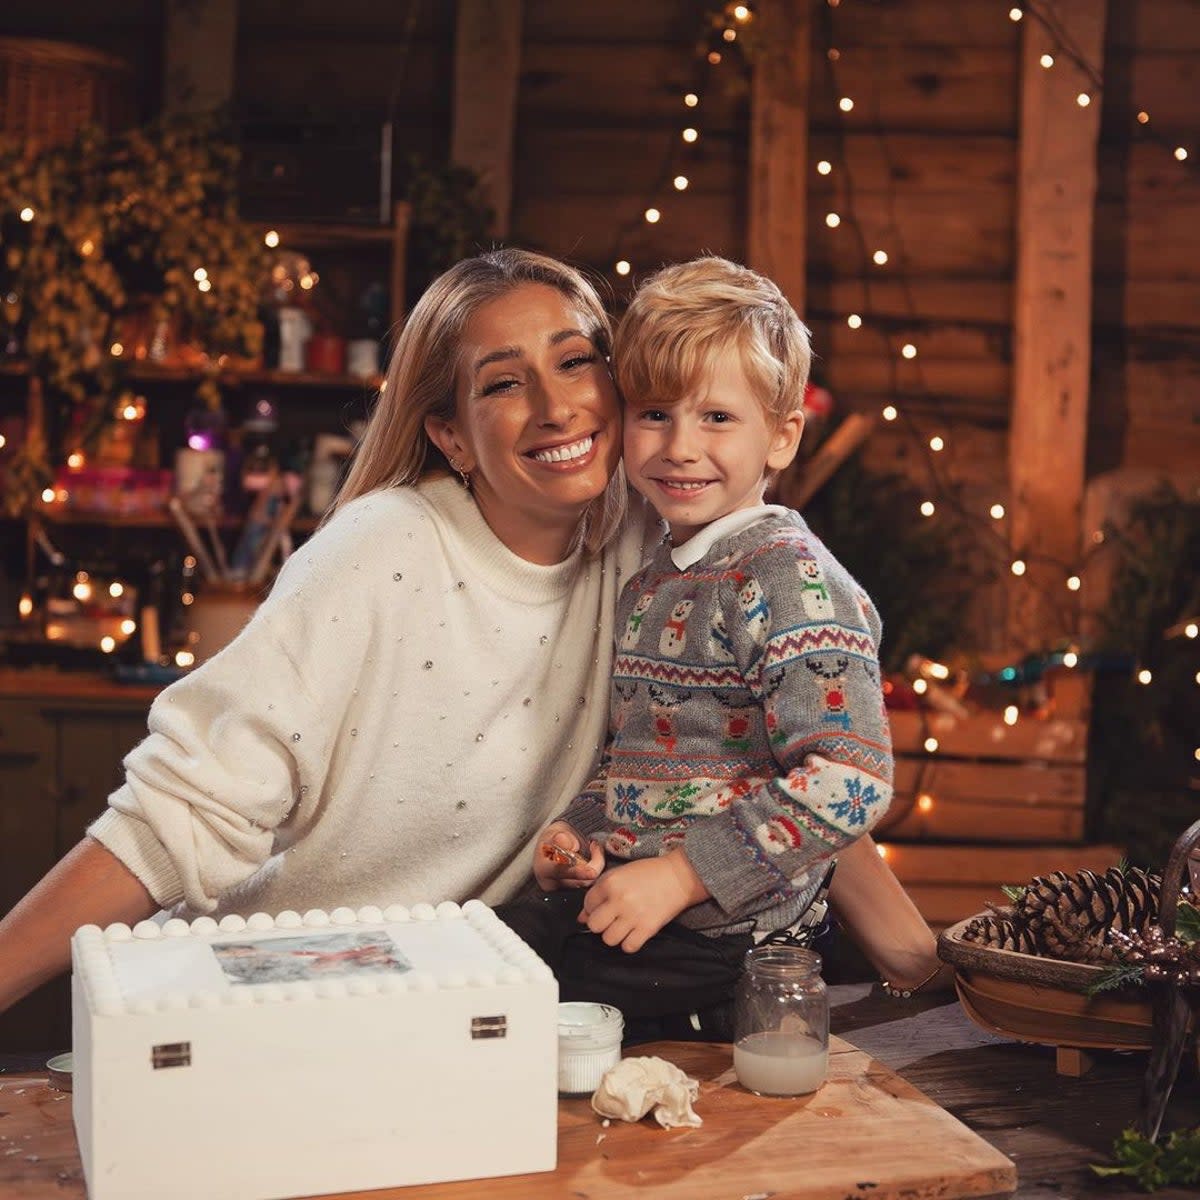 Joe Swash has revealed their kids including son Rex (pictured) have got the crafting bug from Stacey Solomon (Instagram)